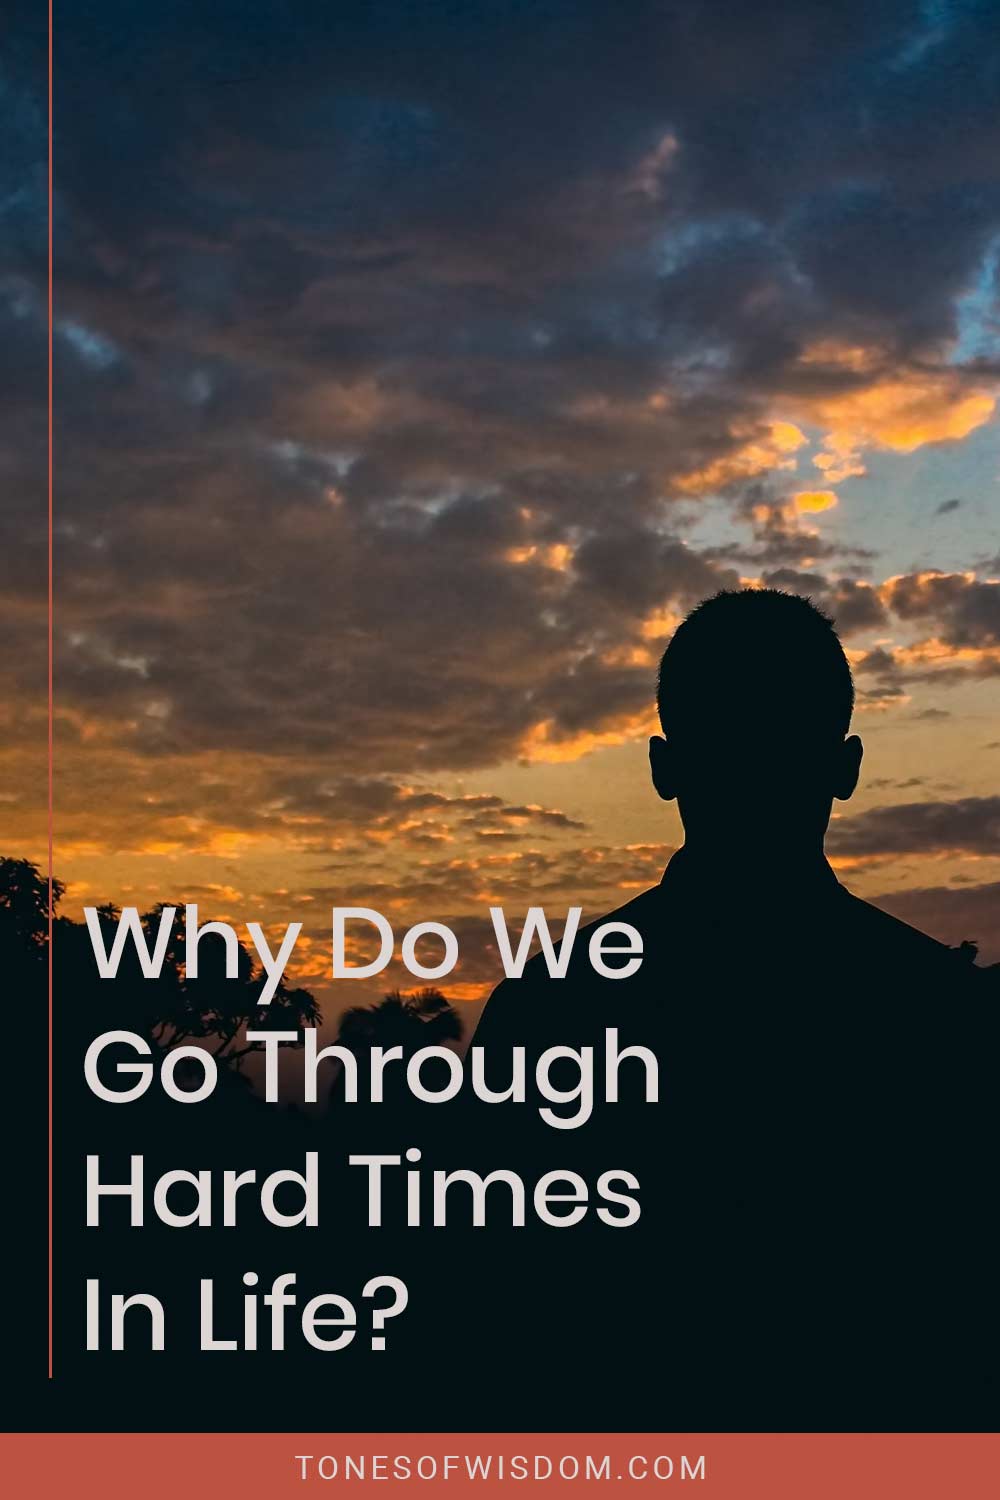 A Man's silhouette - Why Do We Go Through Hard Times In Life?